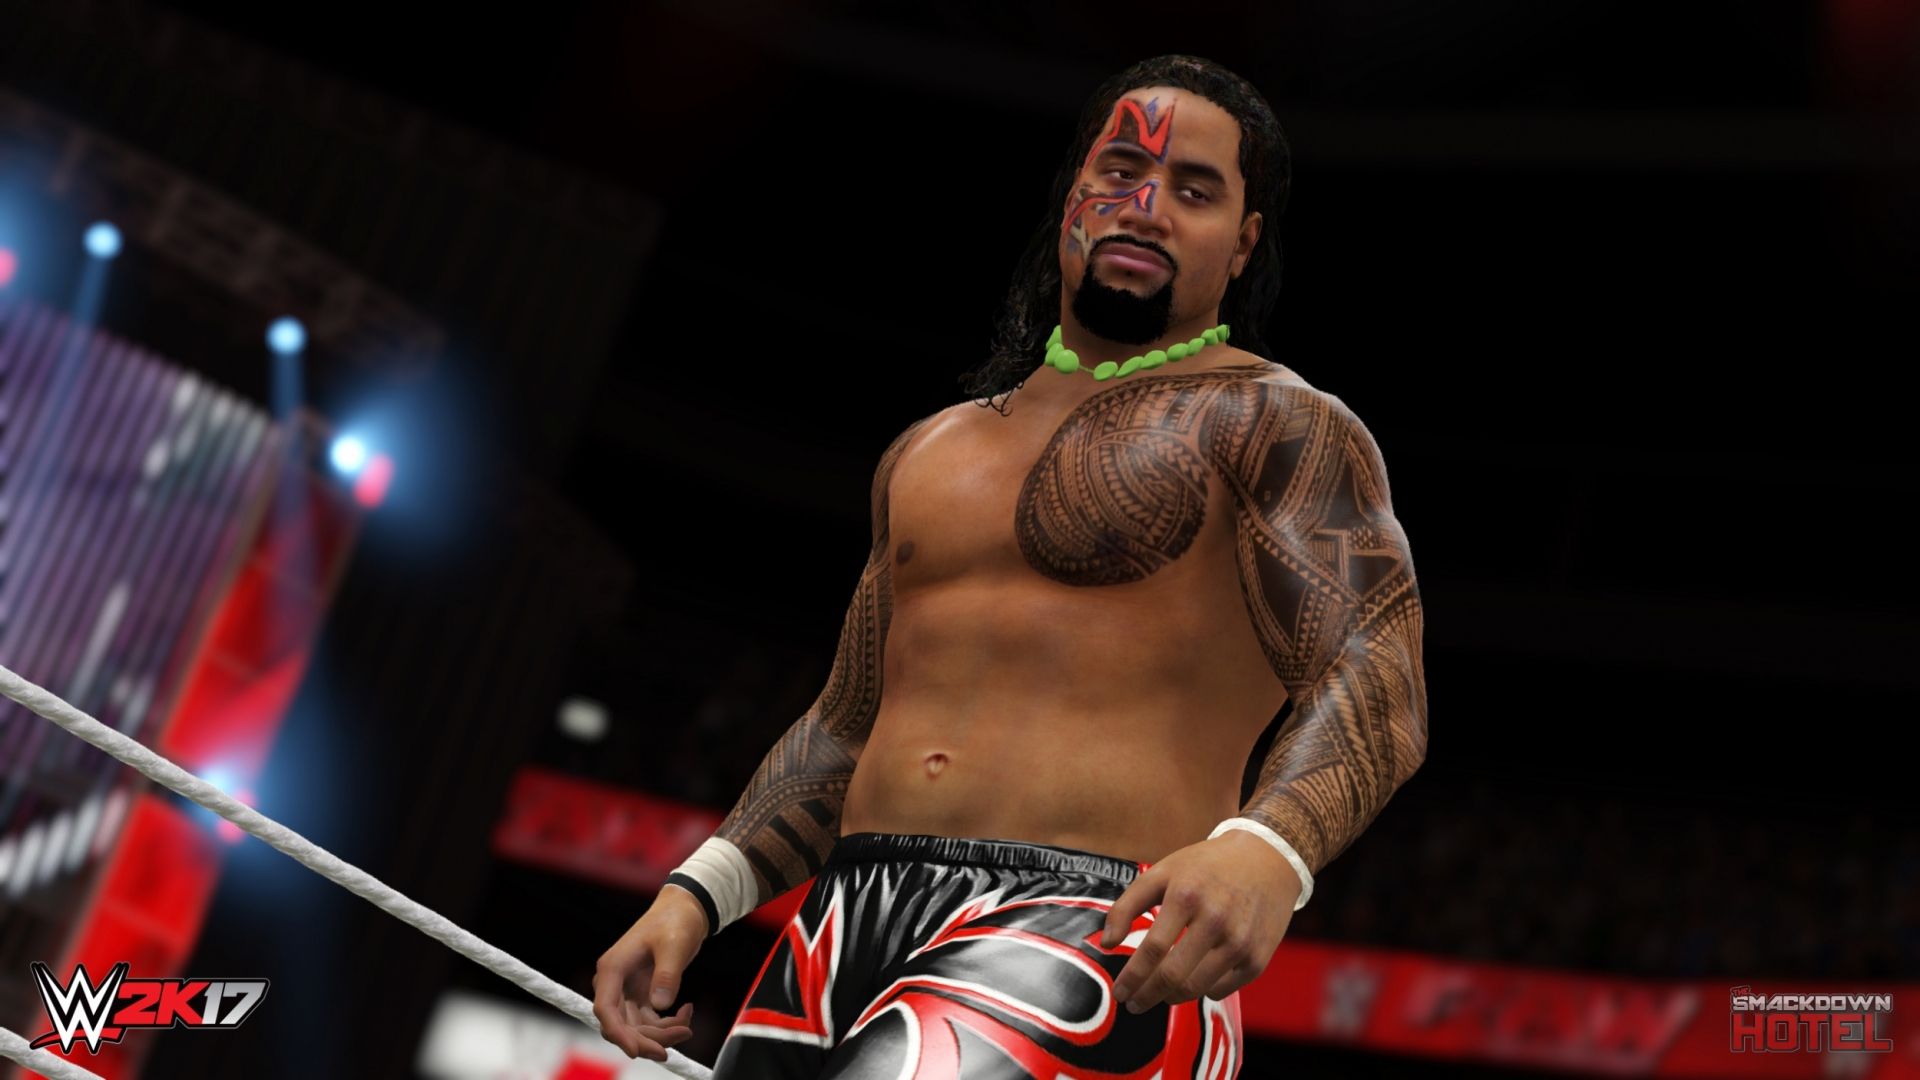 Free download Jimmy Uso WWE 2K17 Roster [1920x1080] for your Desktop, Mobile & Tablet. Explore WWE 2K17 Wallpaper. WWE 2K17 Wallpaper, 2k17 Wallpaper, NBA 2k17 Wallpaper